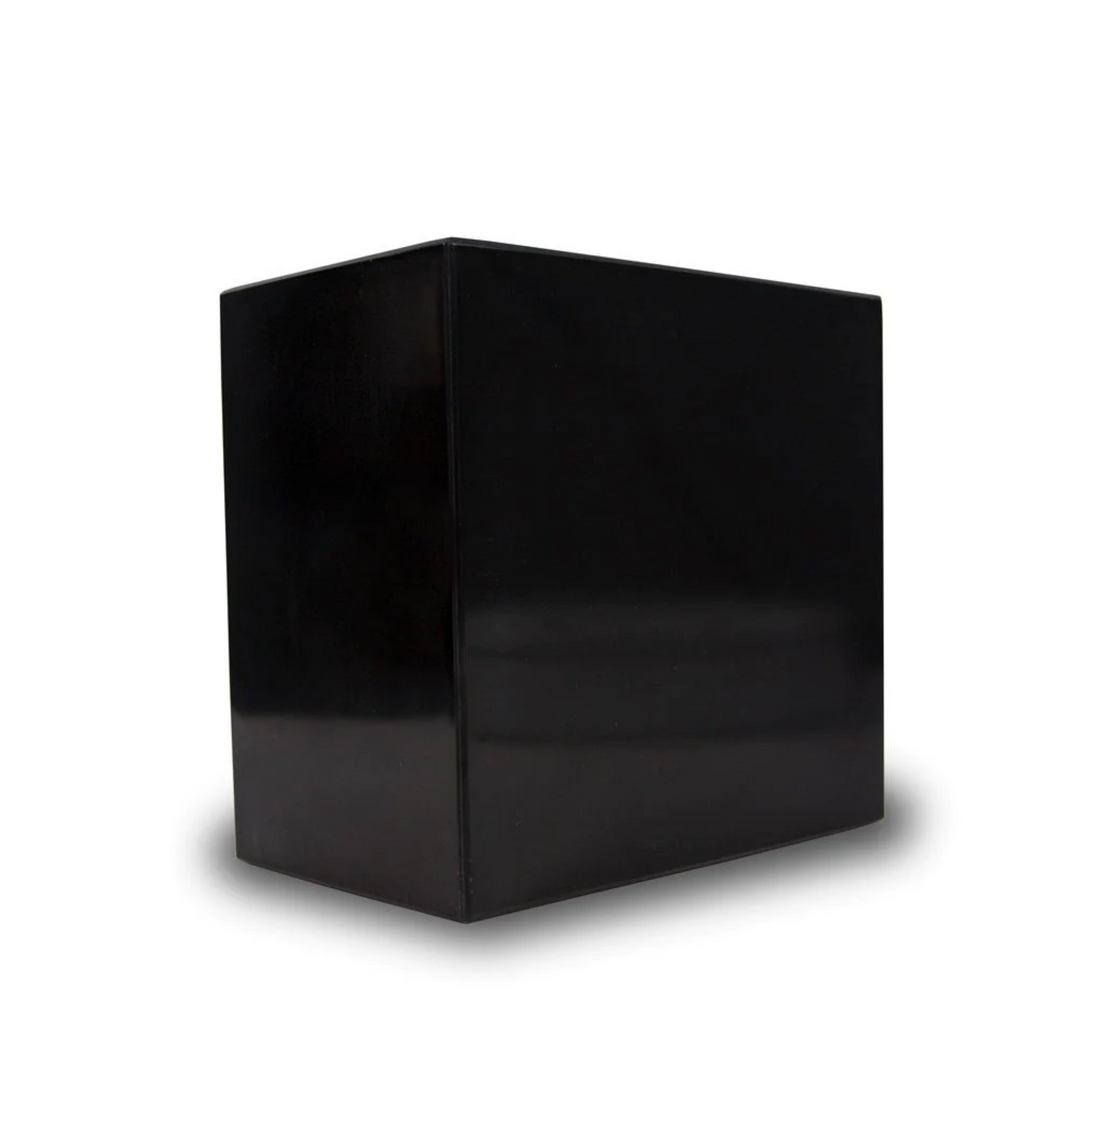 The Centre Urn in Black Marble